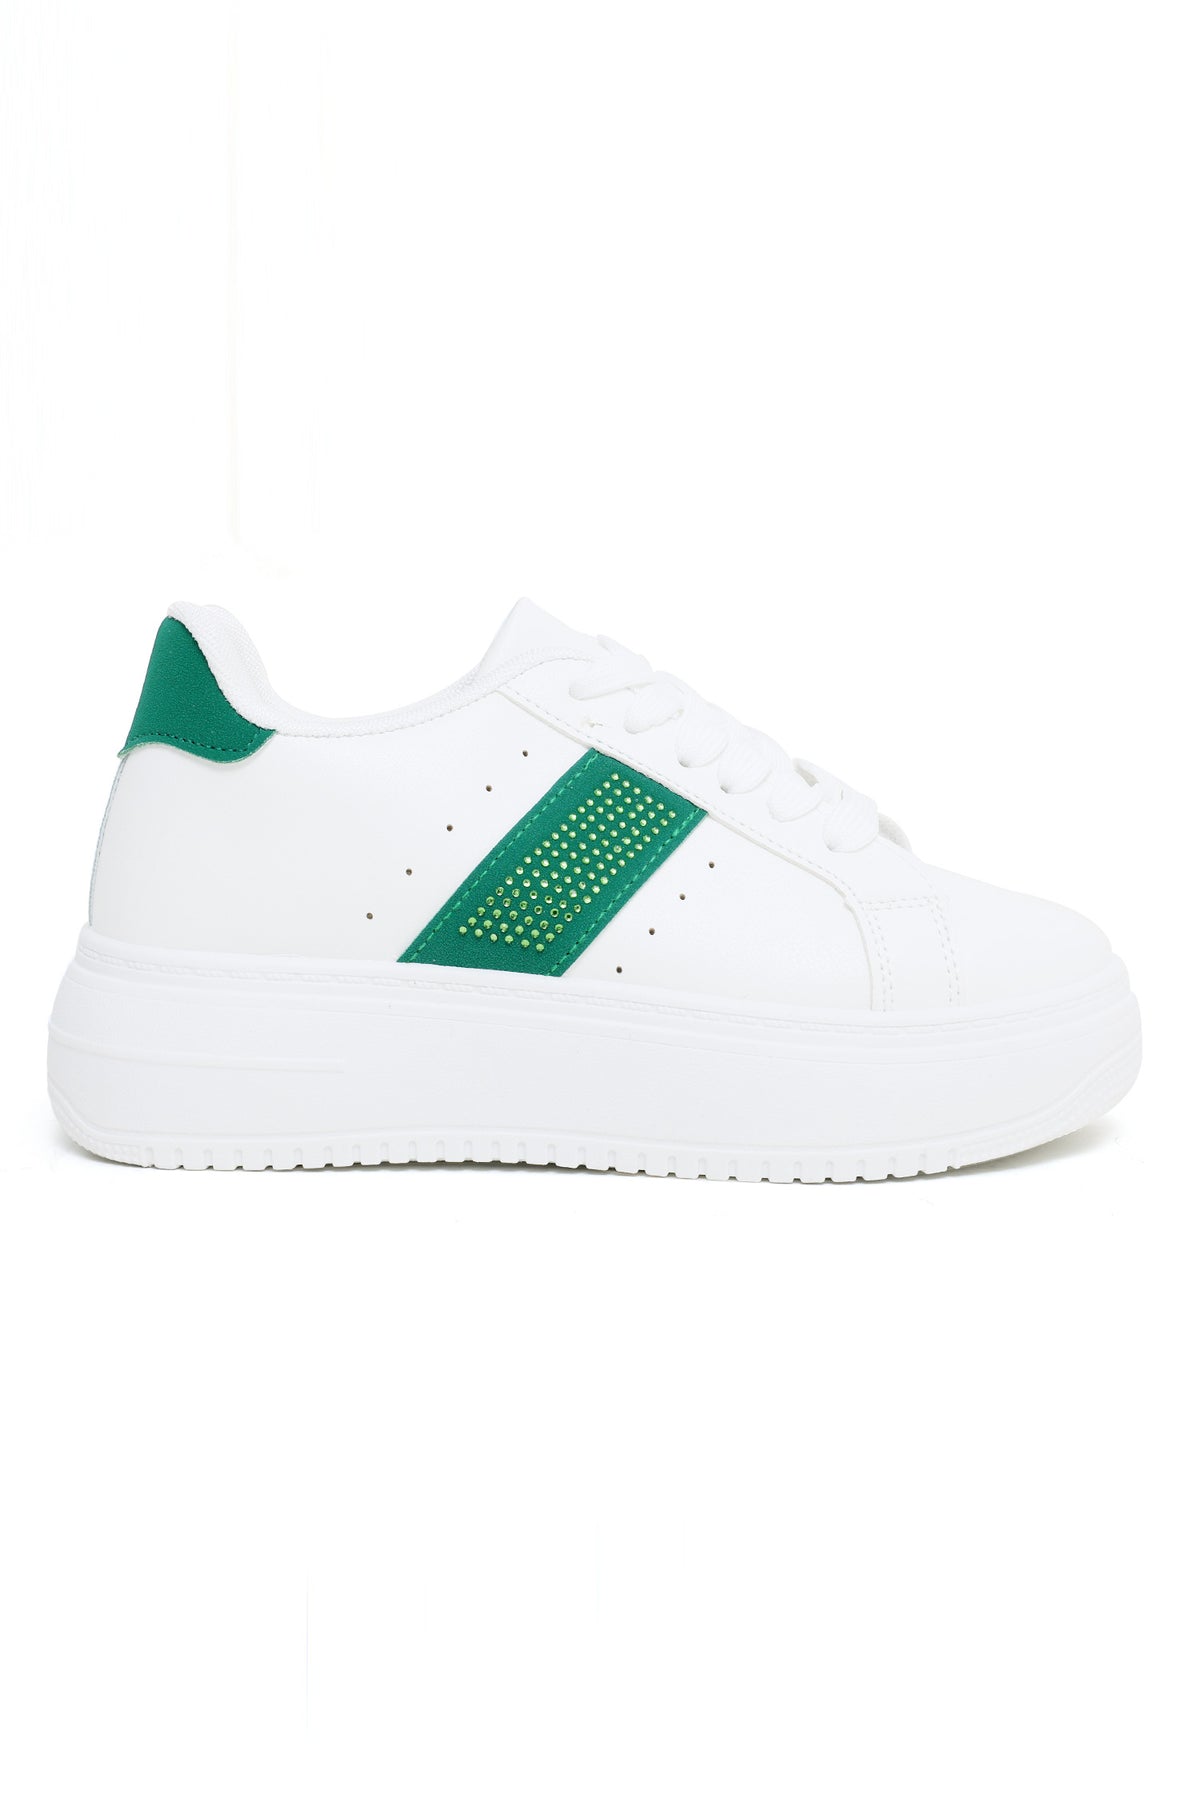 CHUNKY SNEAKERS-WHT/GREEN